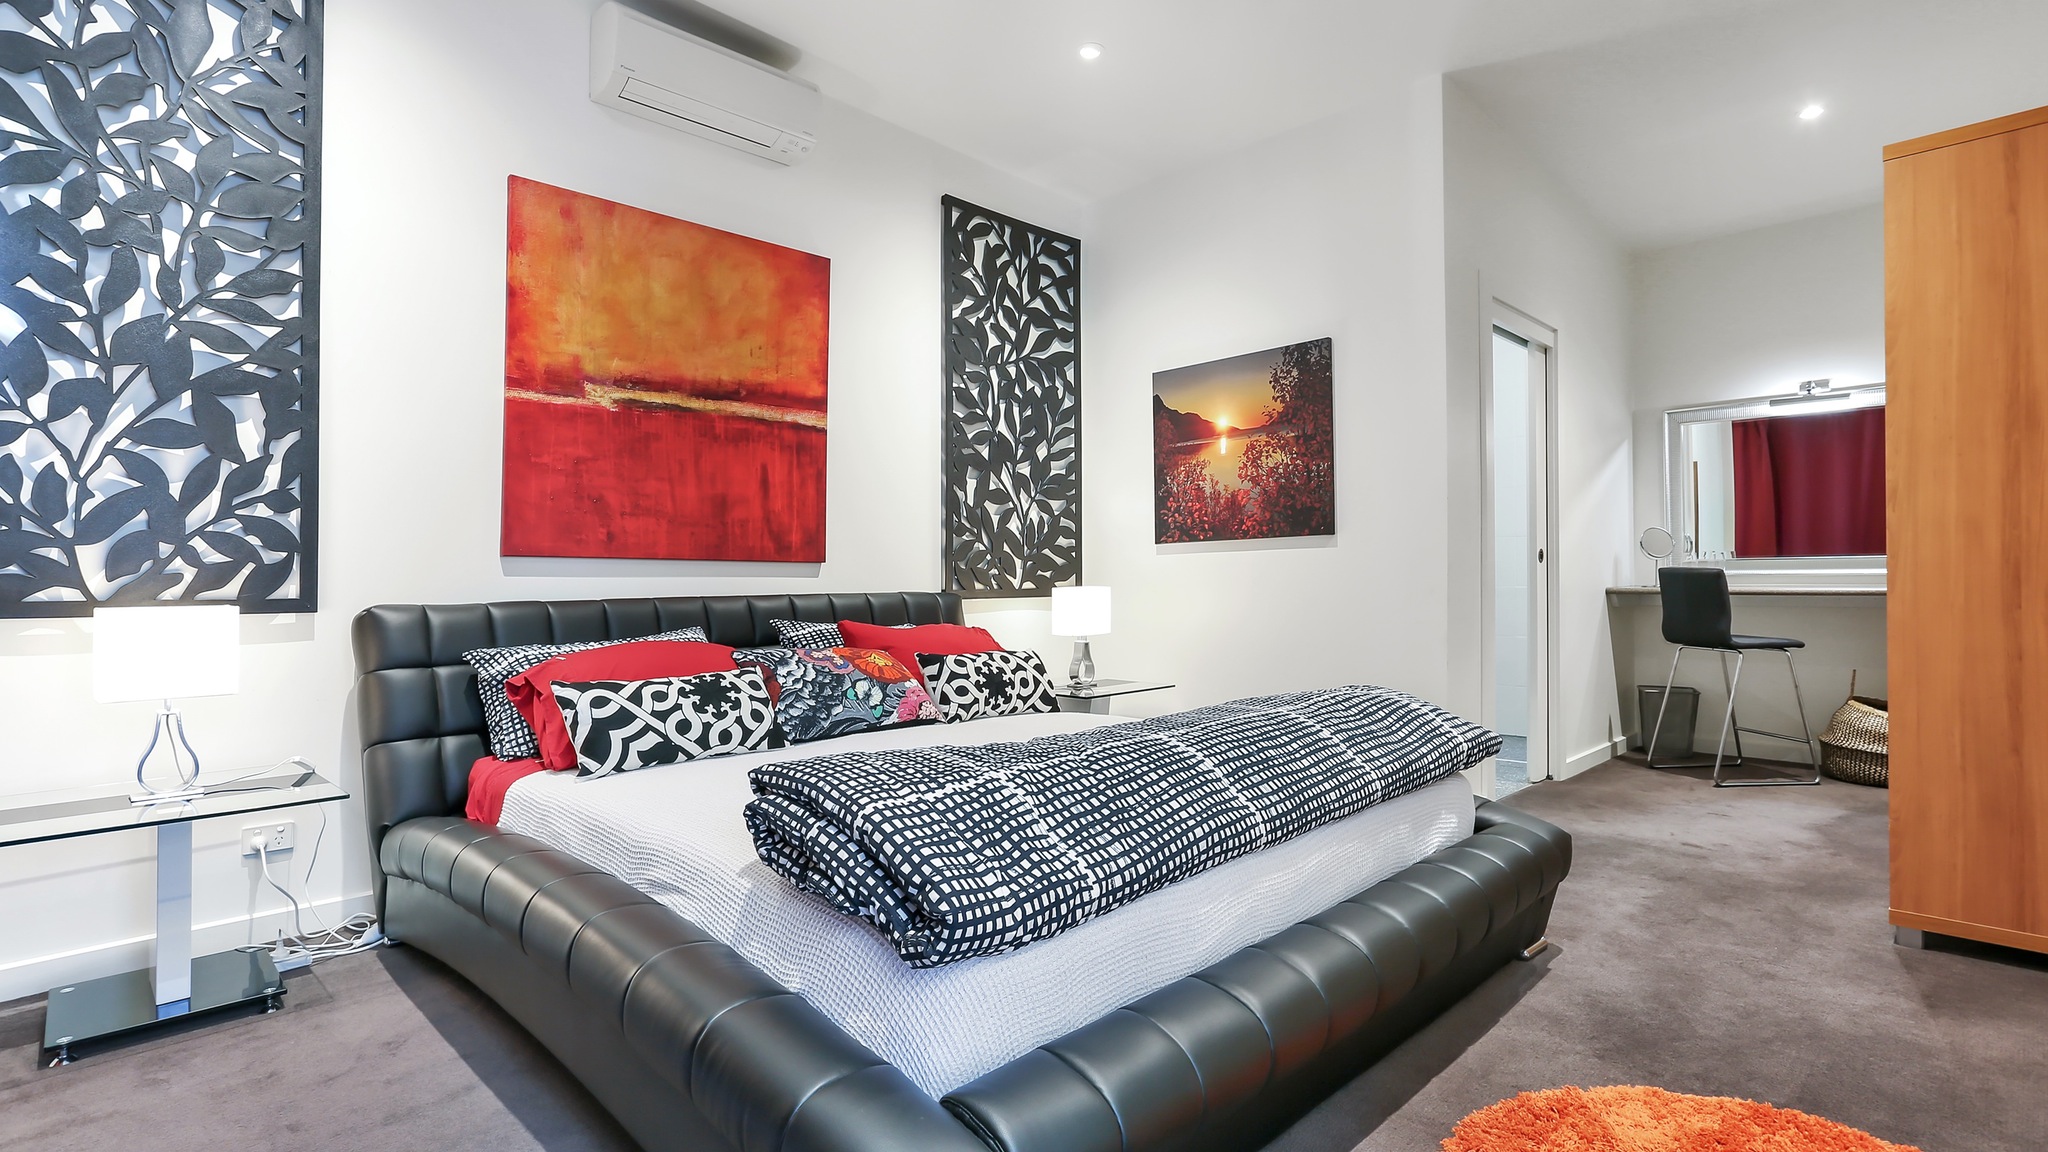 Barossa White House: The West Wing - Accommodation in Surfers Paradise 0